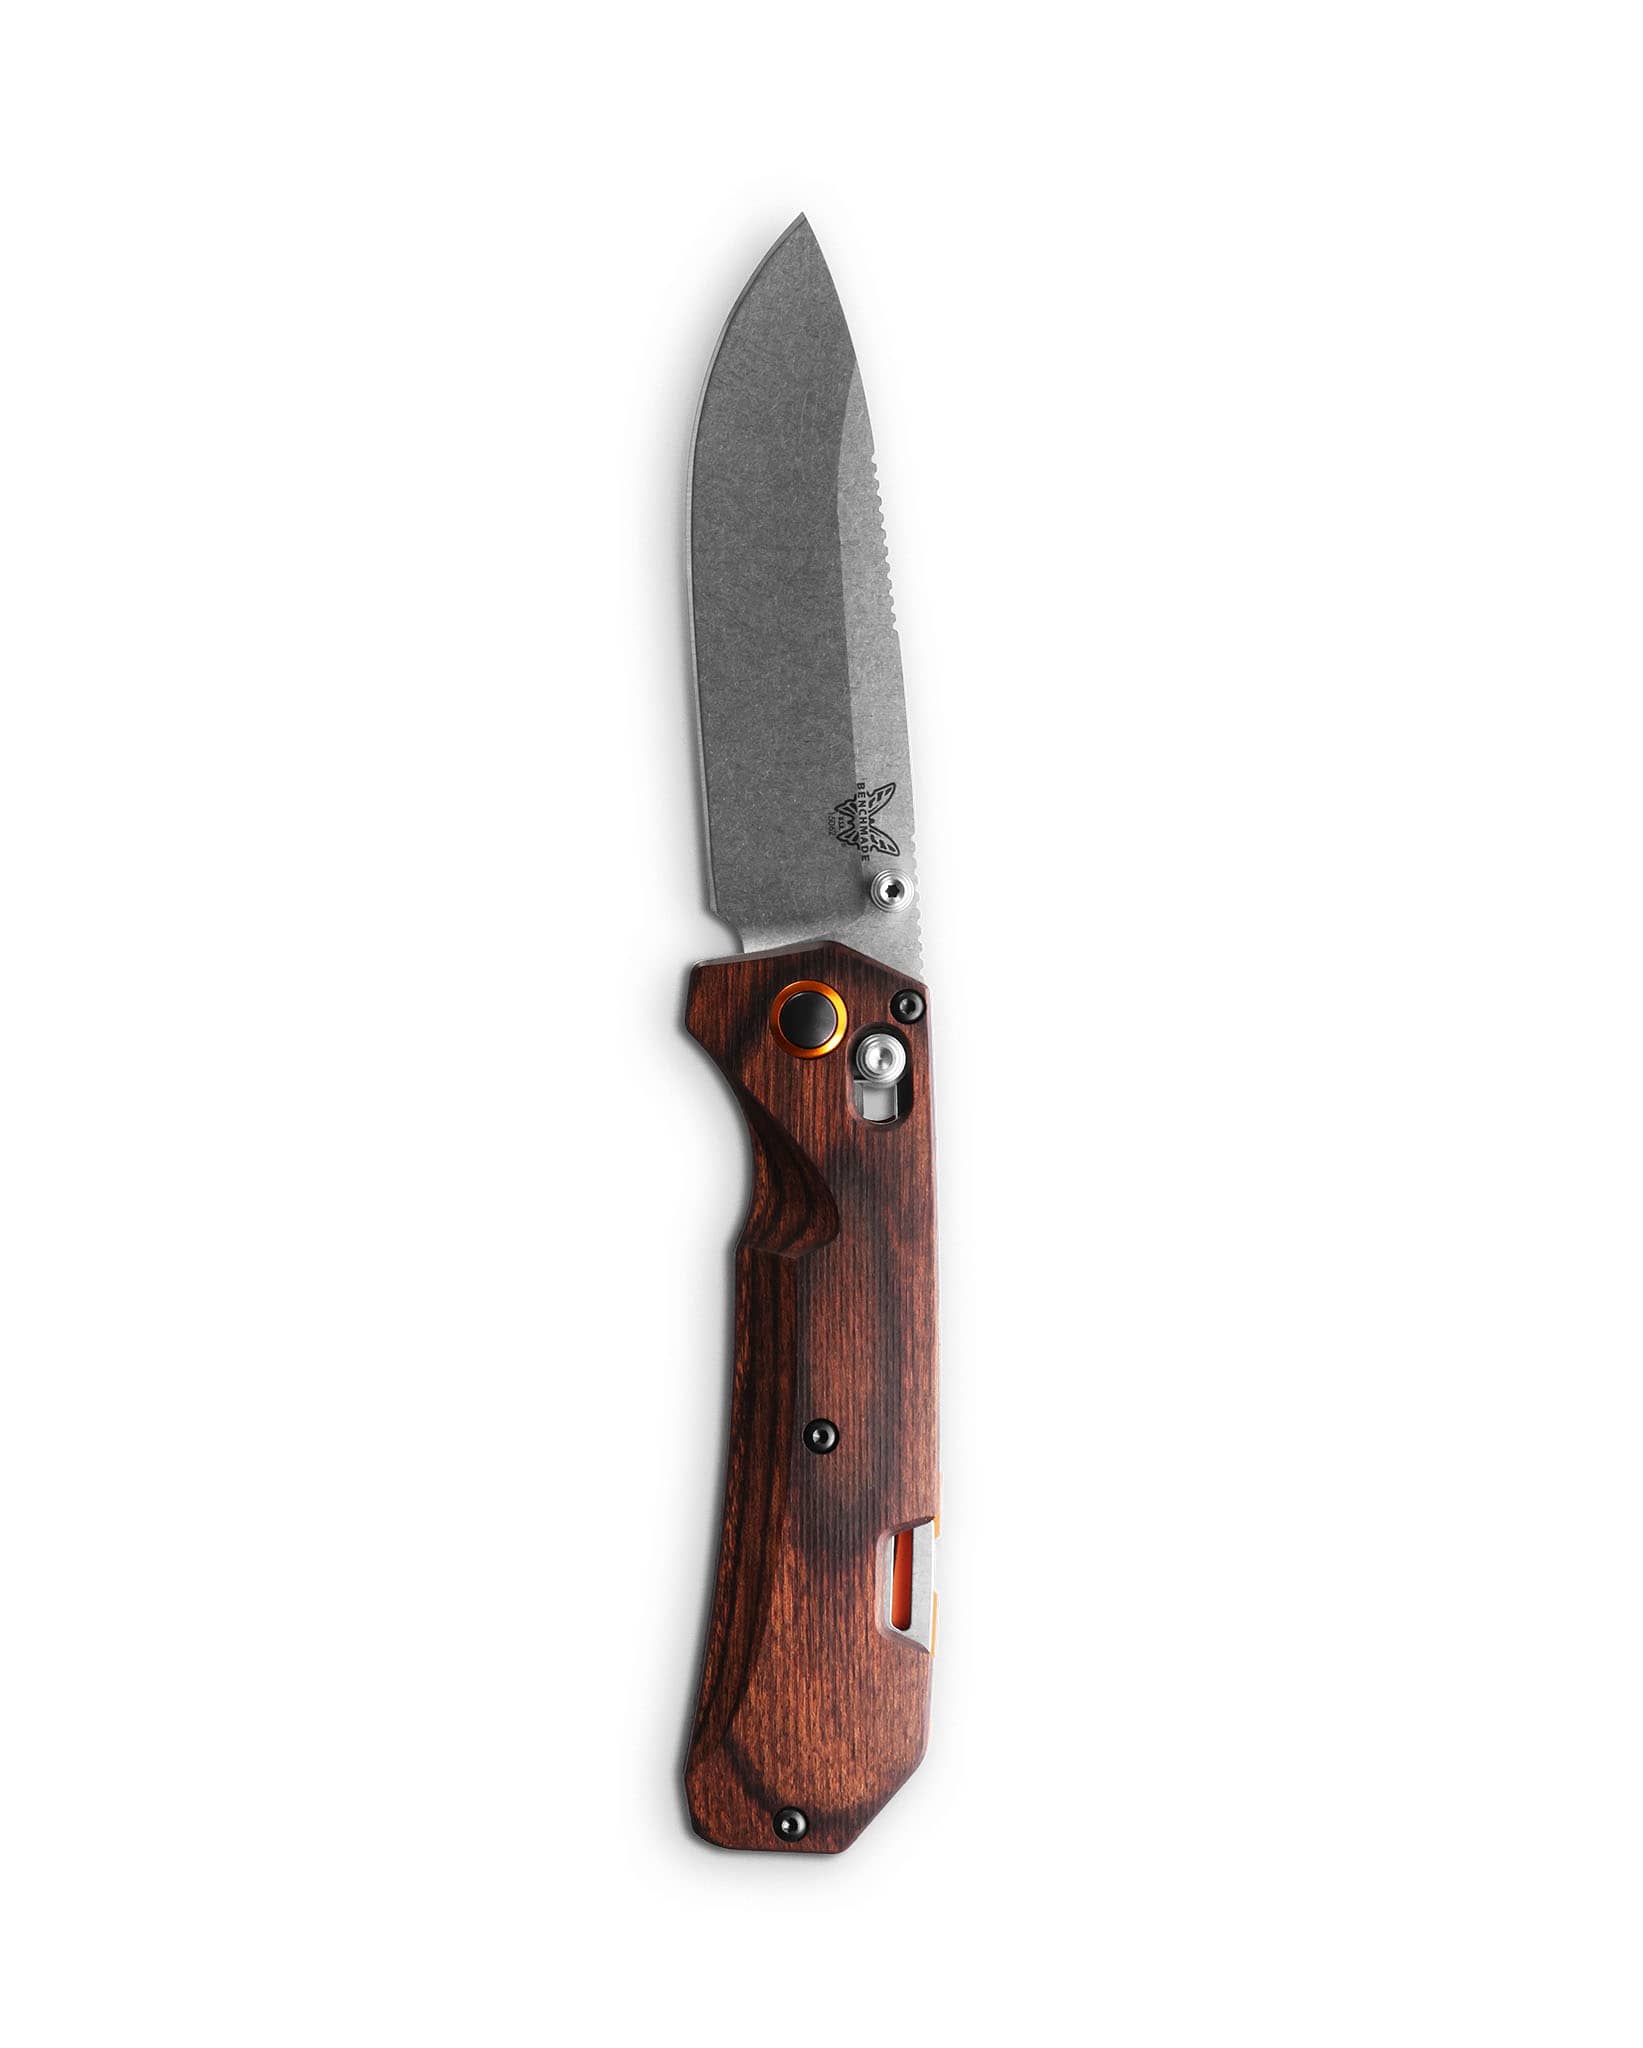 Benchmade® 15062-01 Grizzly Creek Folding Knife